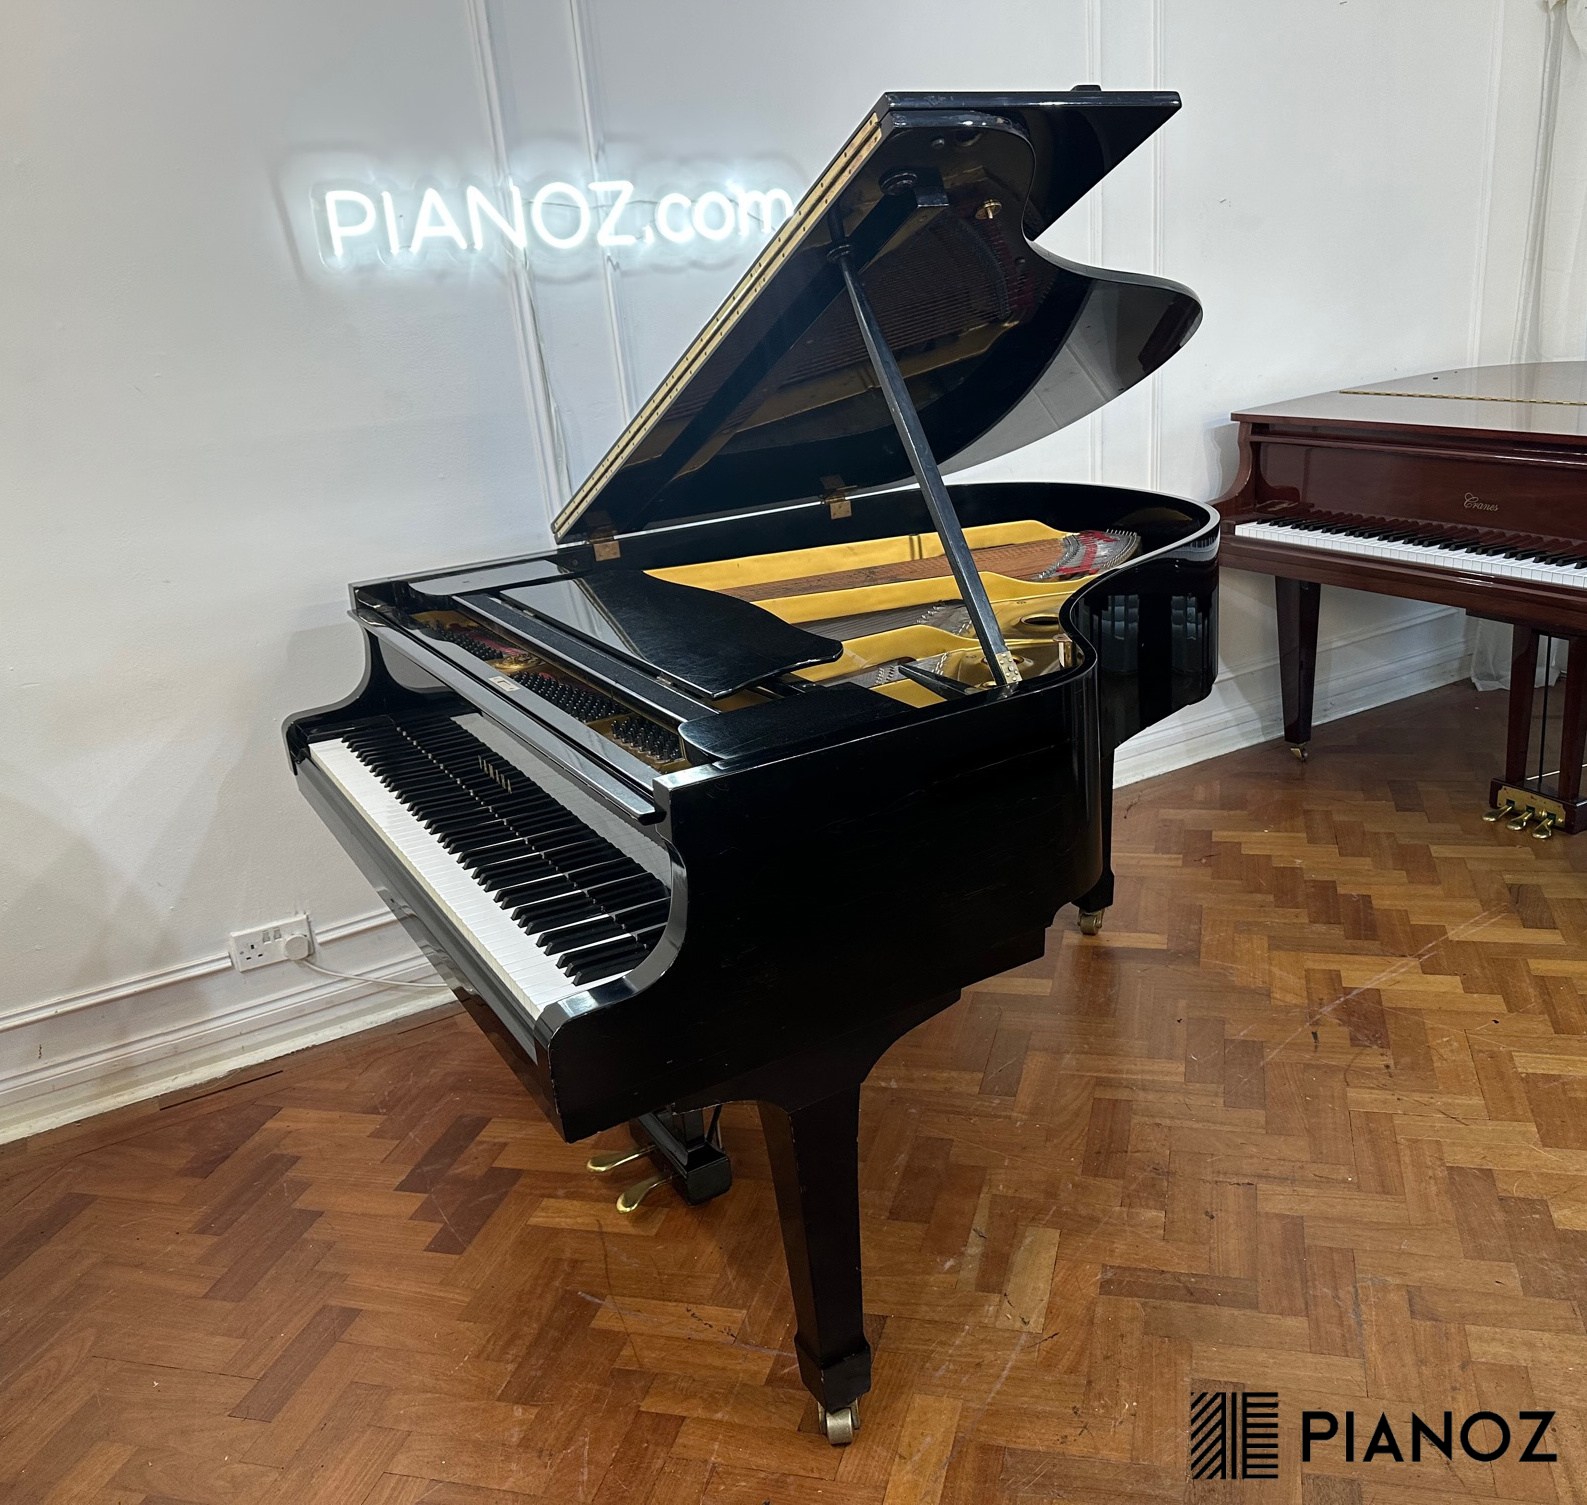 Yamaha G2 Japanese Baby Grand Piano piano for sale in UK